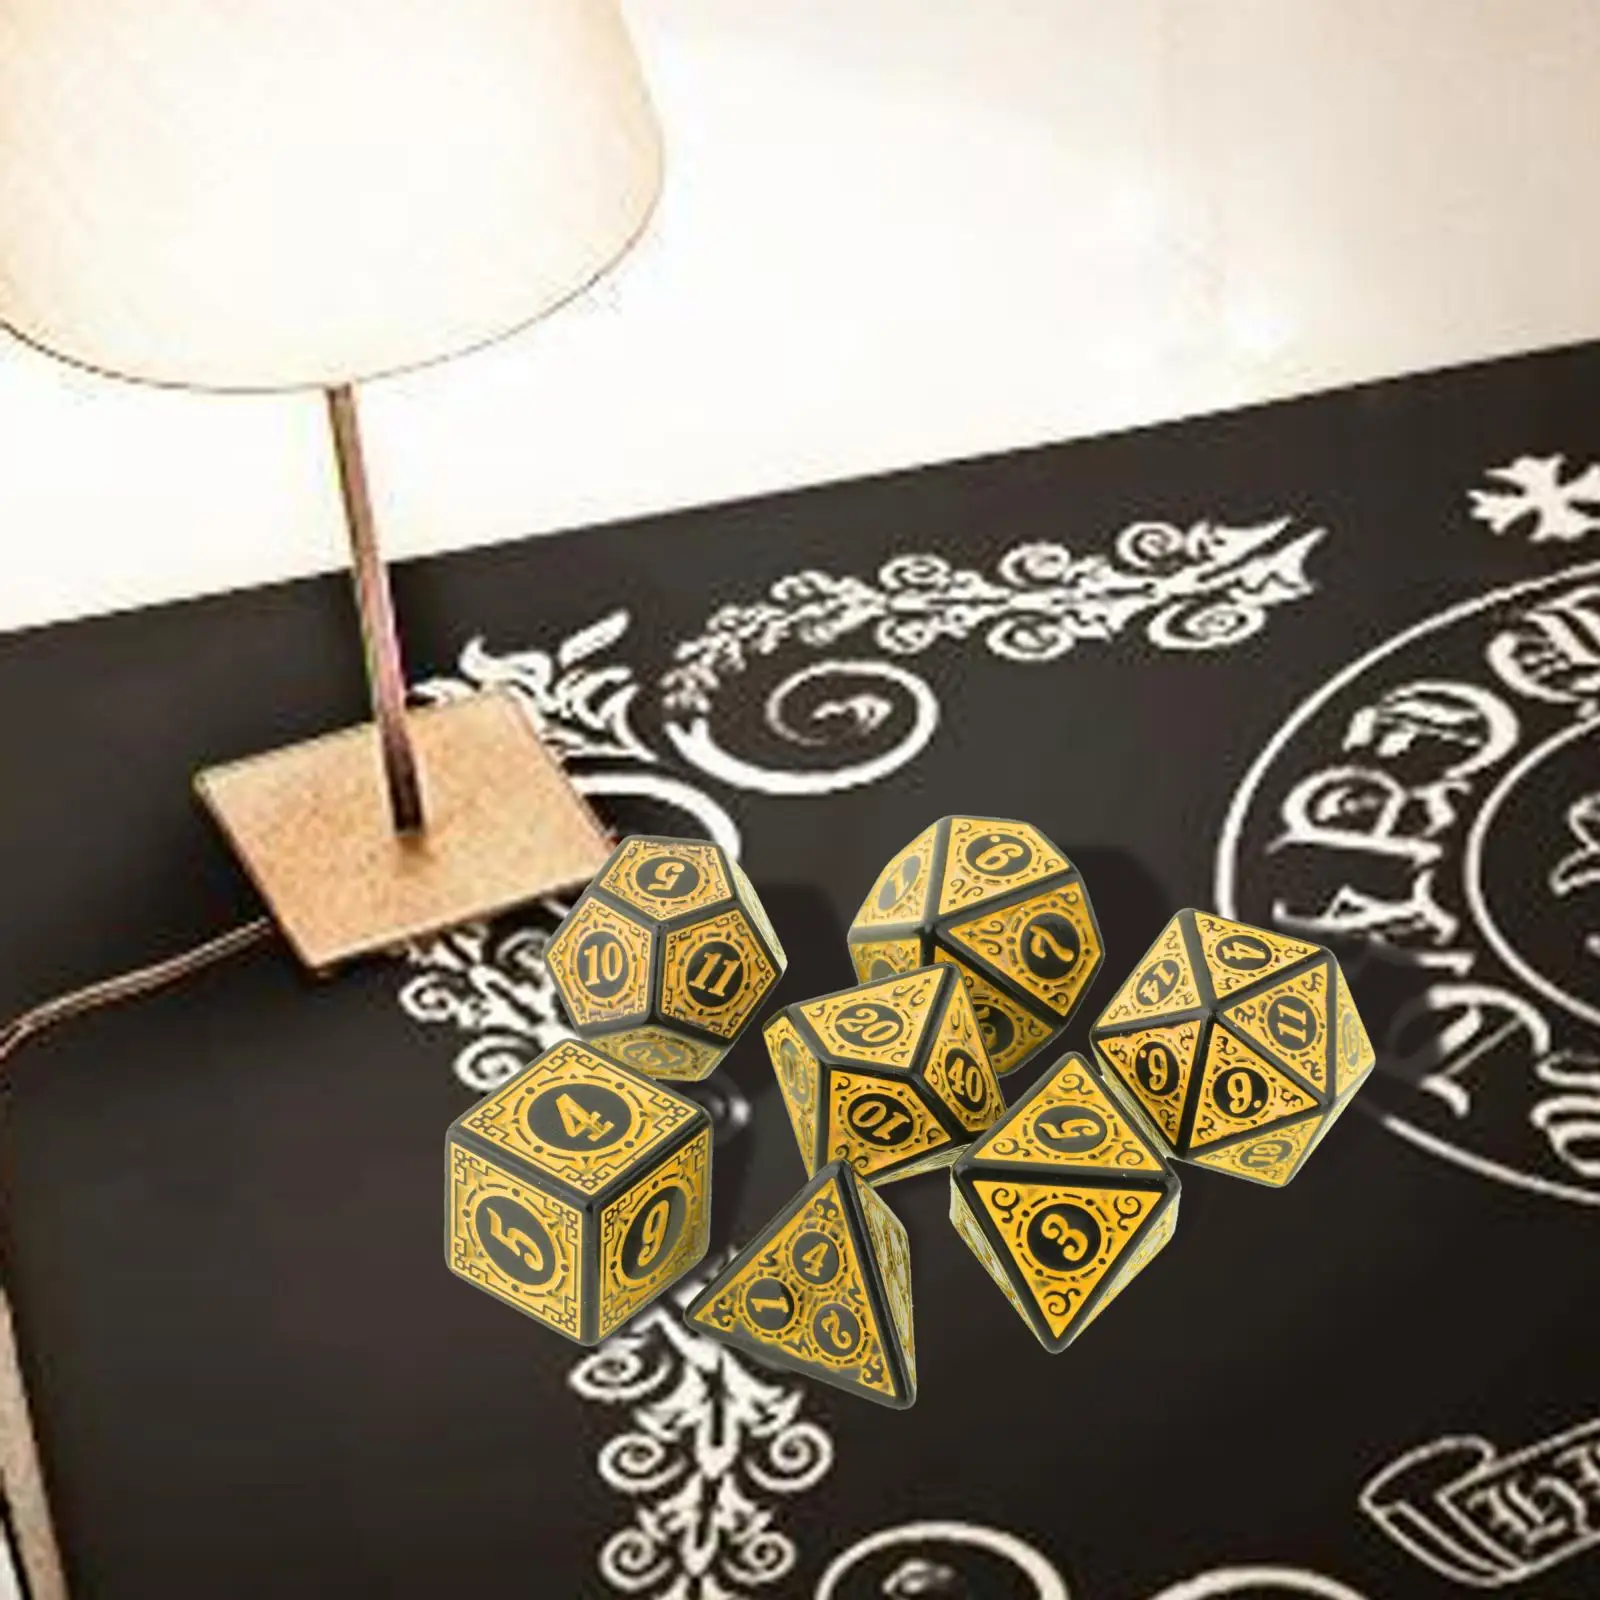 7 Pieces Multi Sided Polyhedral Dice Toy Board-Game DND Diec for Home Bar Party Playing Game Toys